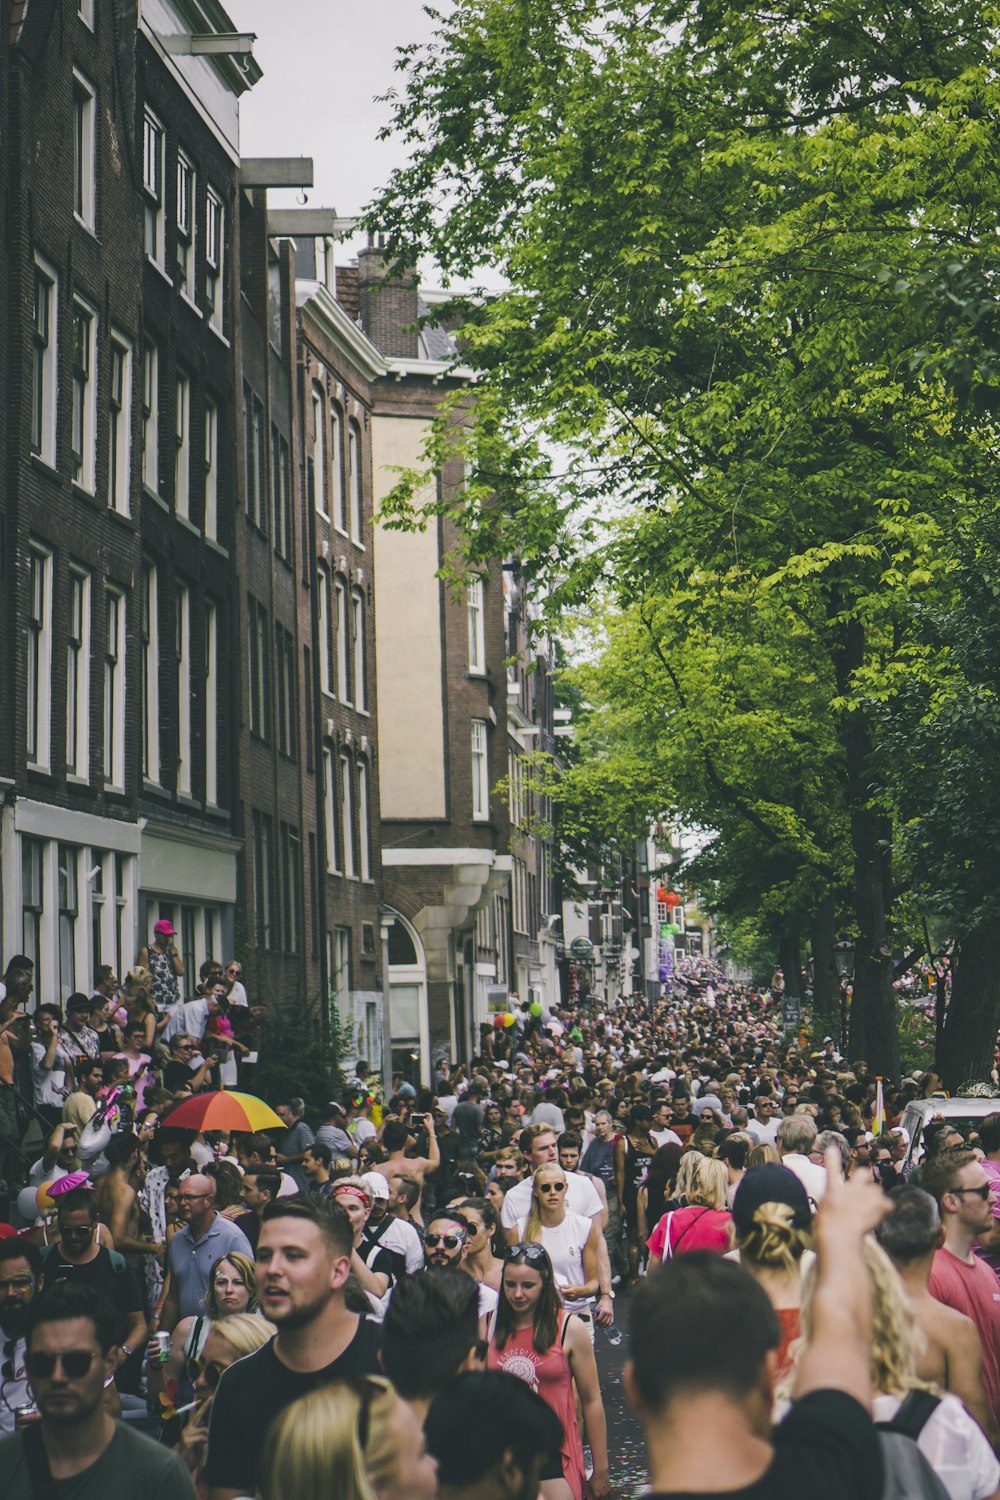 crowd of people walking the streets during daytime